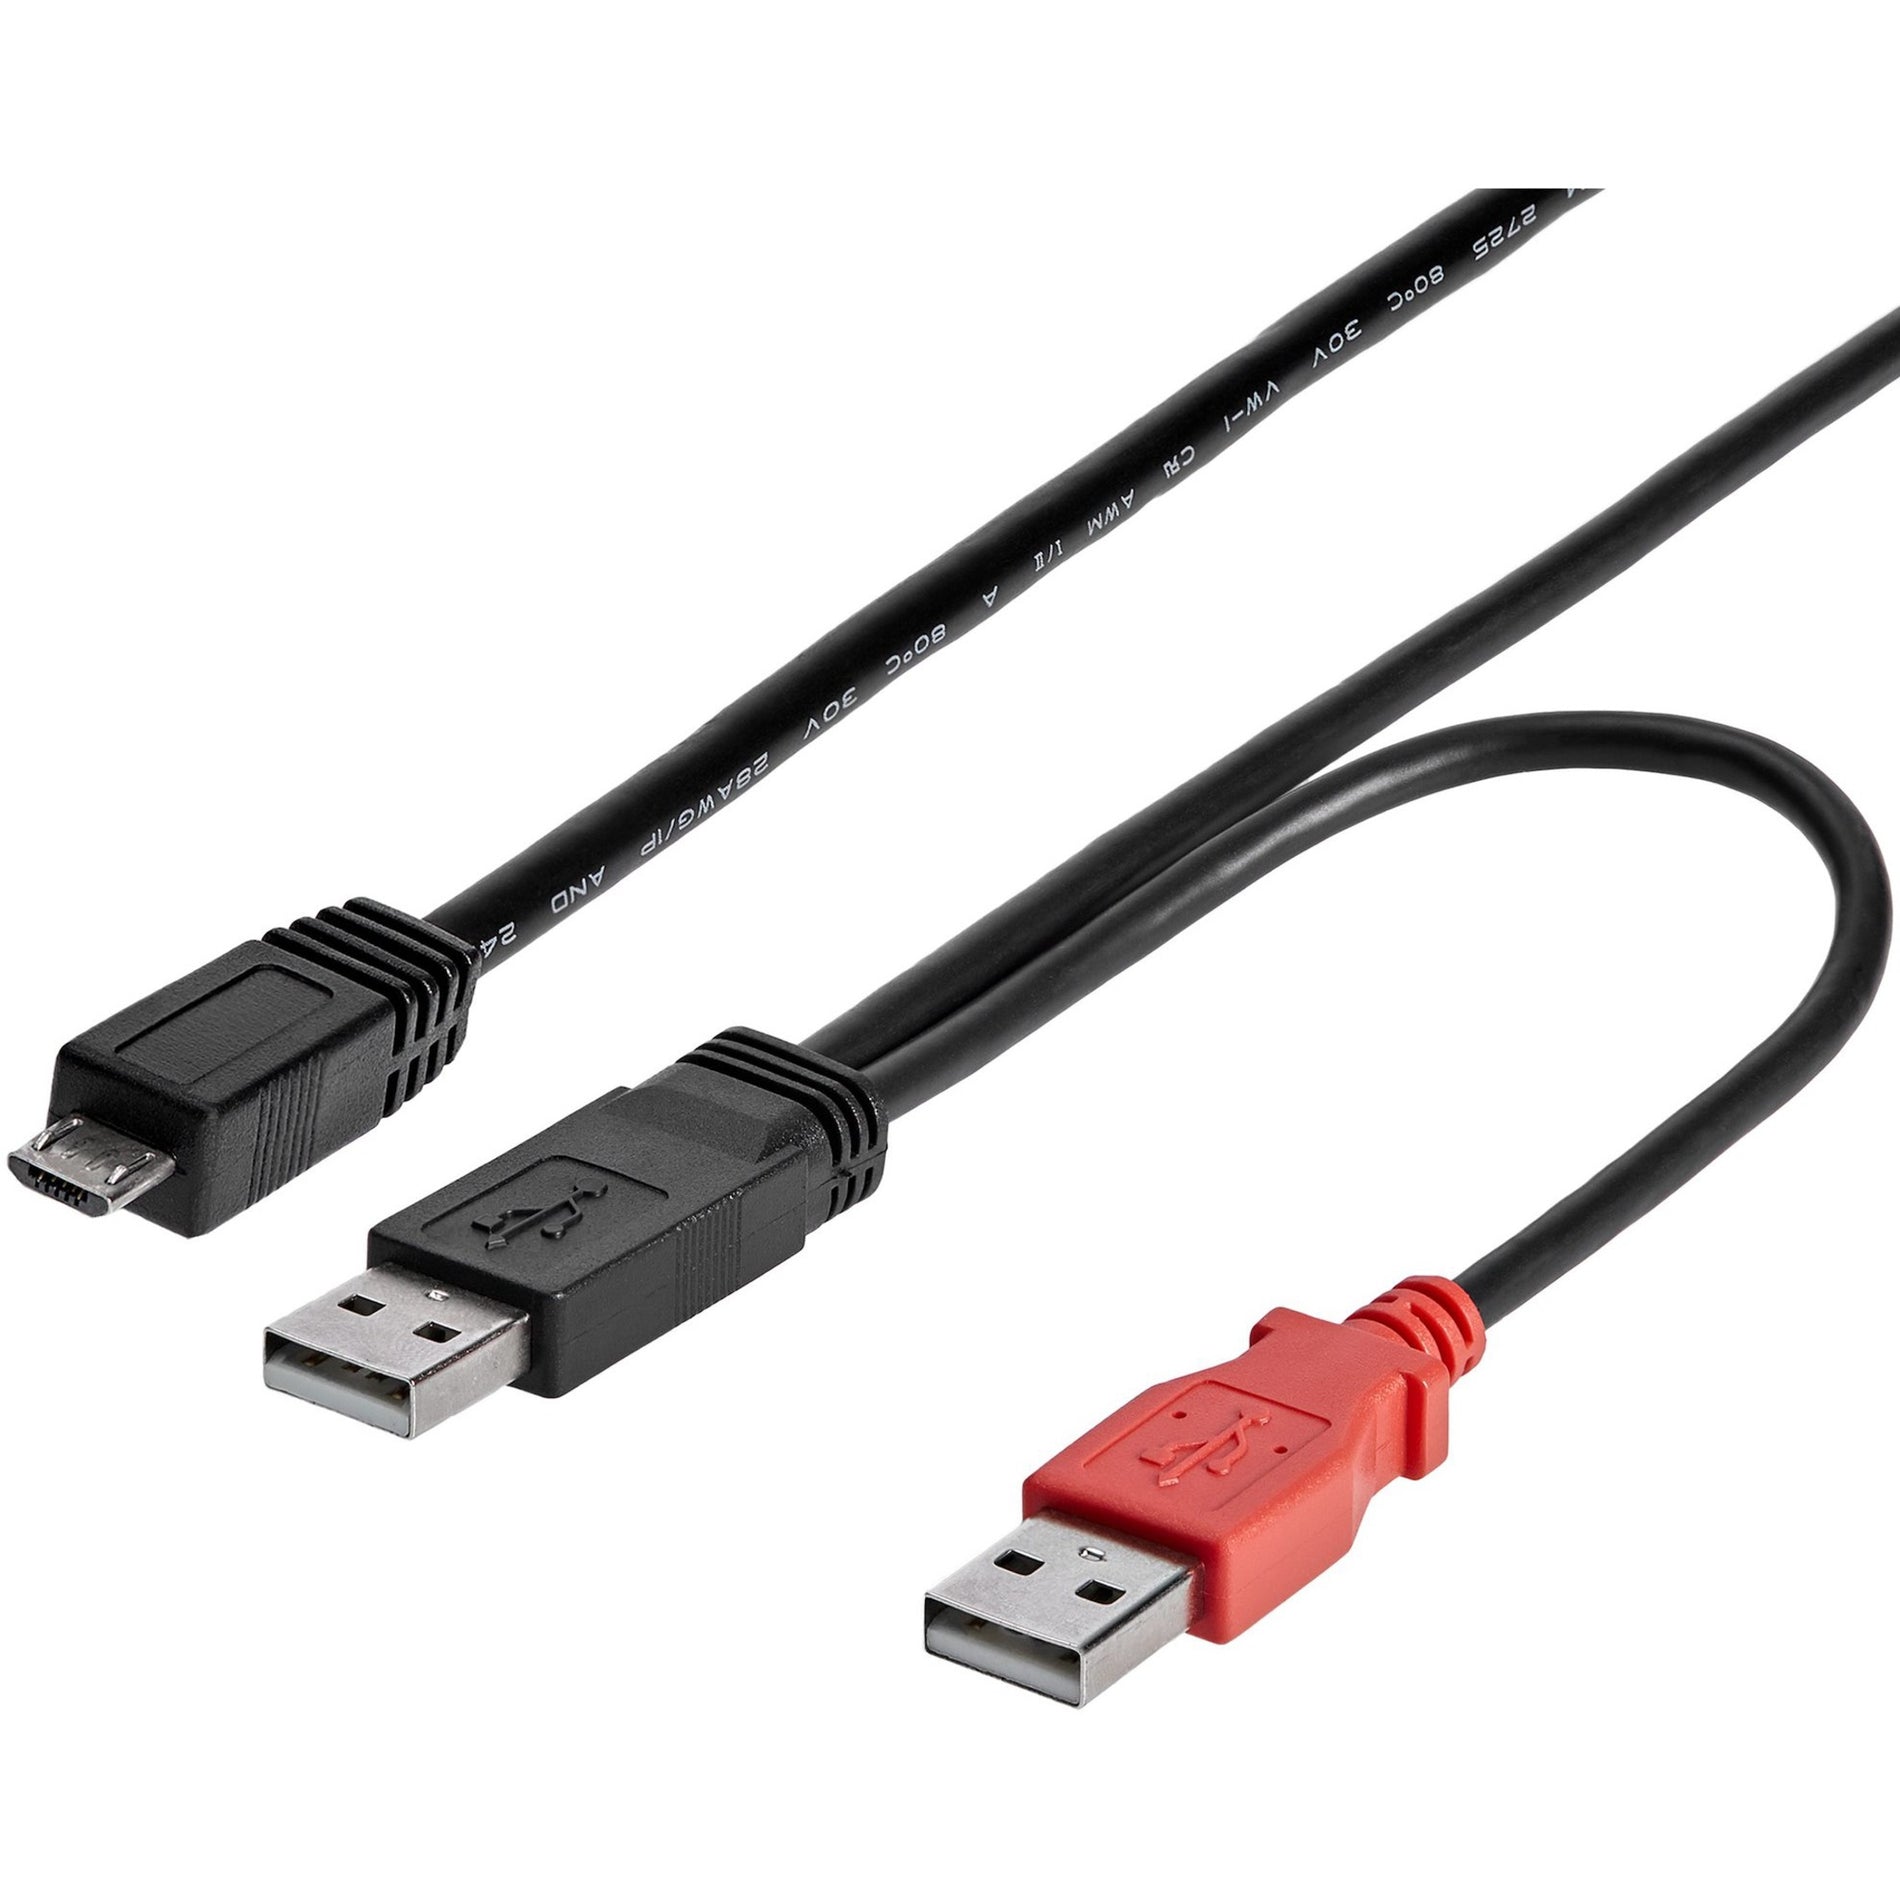 StarTech.com USB2HAUBY3 3 ft USB Y Cable for External Hard Drive - Dual USB A to Micro B, Data Transfer Cable, 480 Mbit/s [Discontinued]